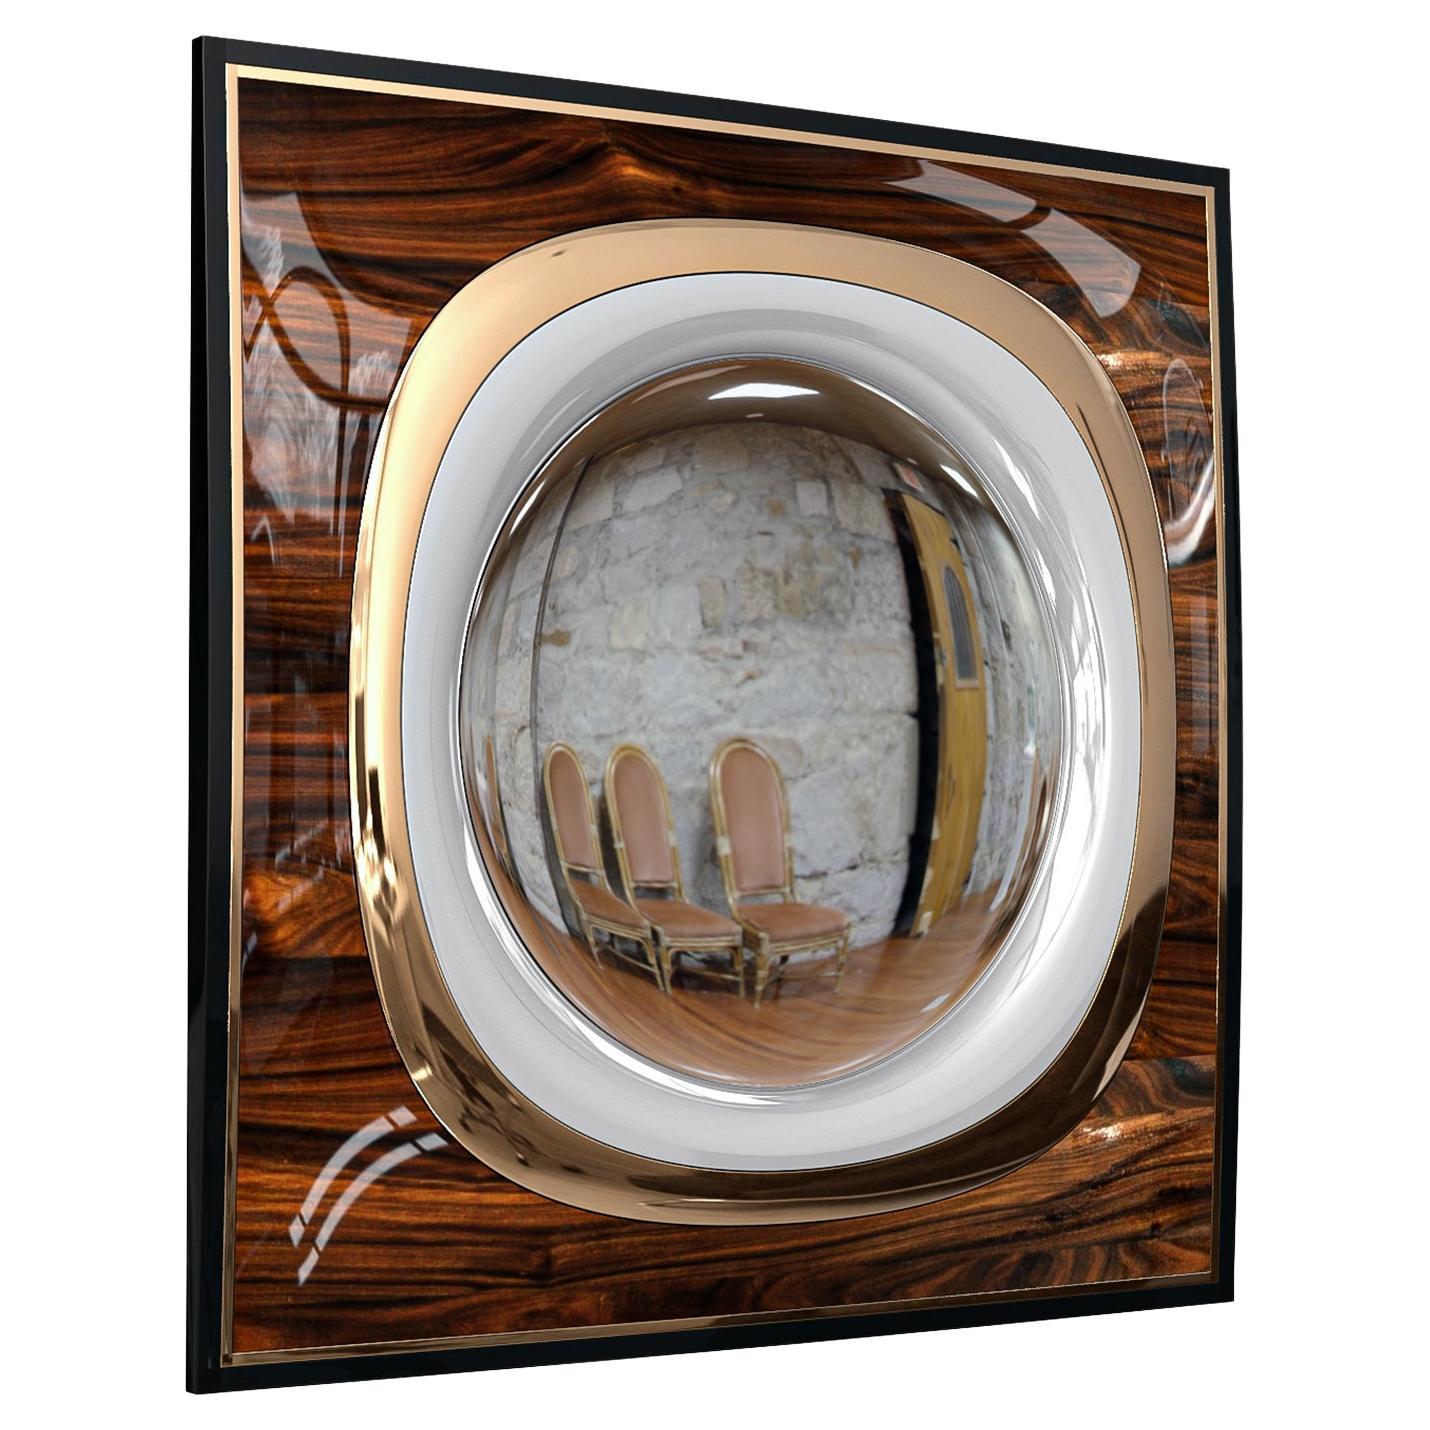 "Calamità" Convex Mirror with Walnut, Stainless Steel, Bronze Details, Istanbul For Sale